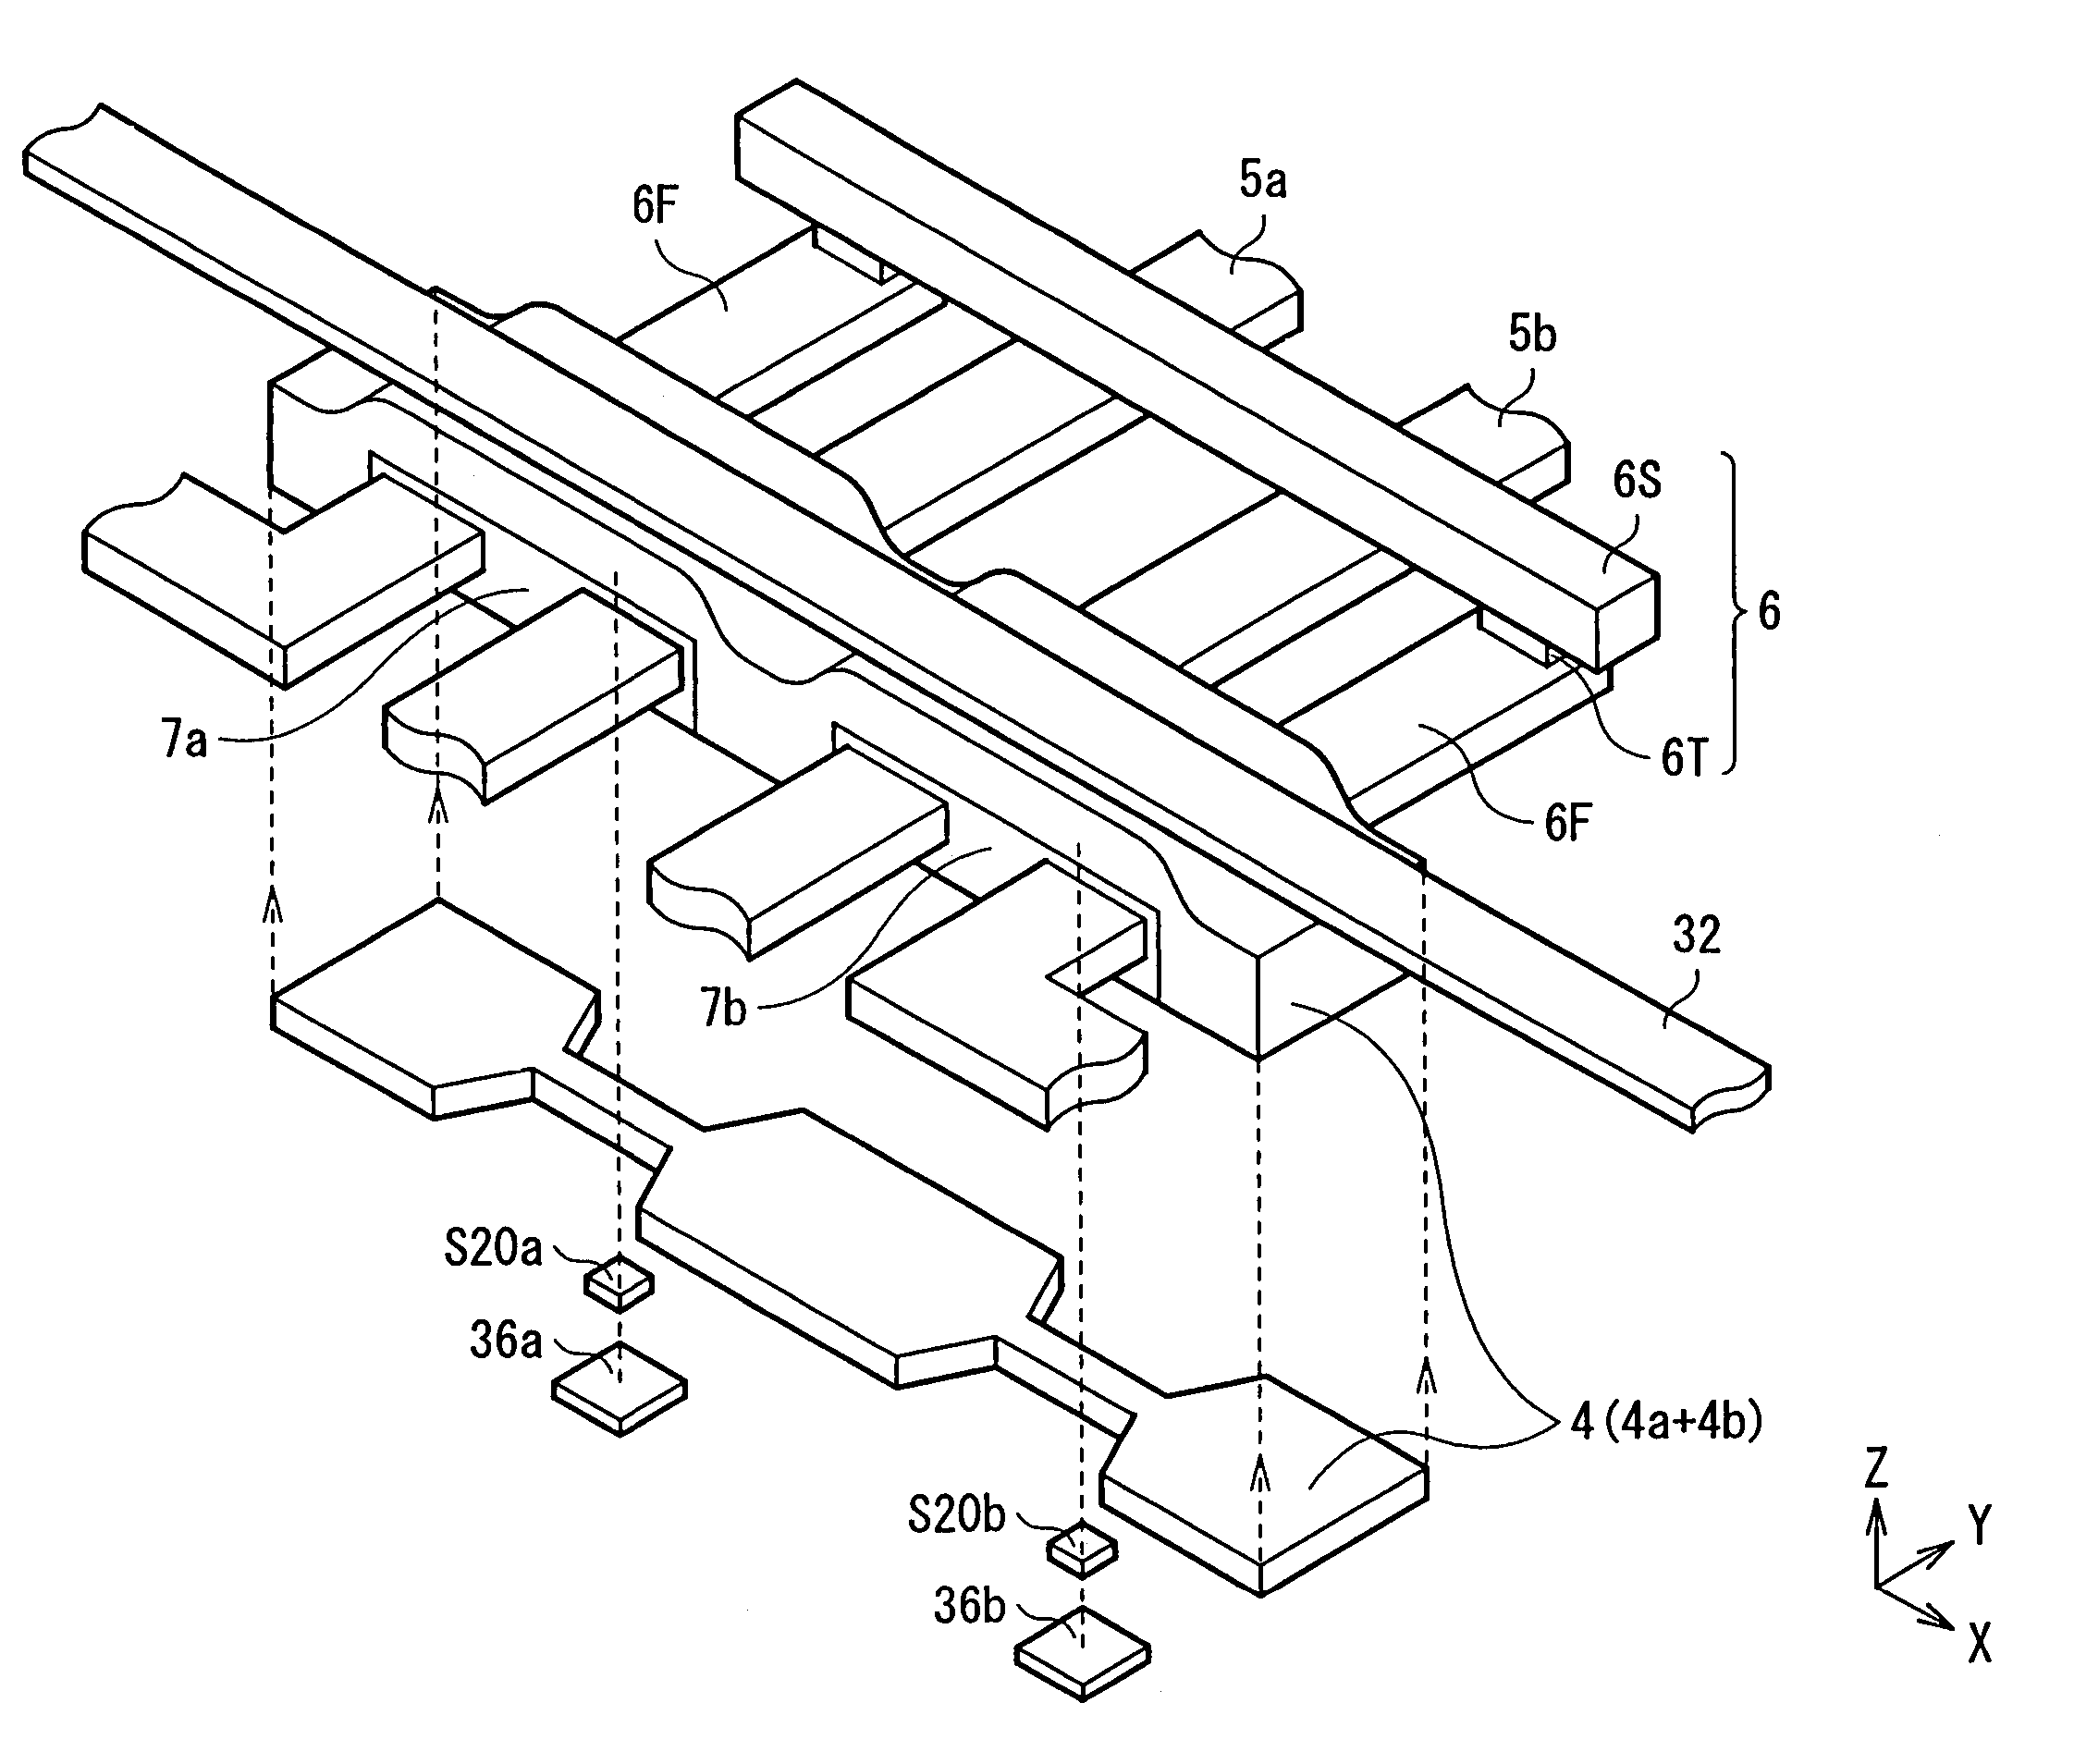 Magnetic memory device and method of manufacturing magnetic memory device